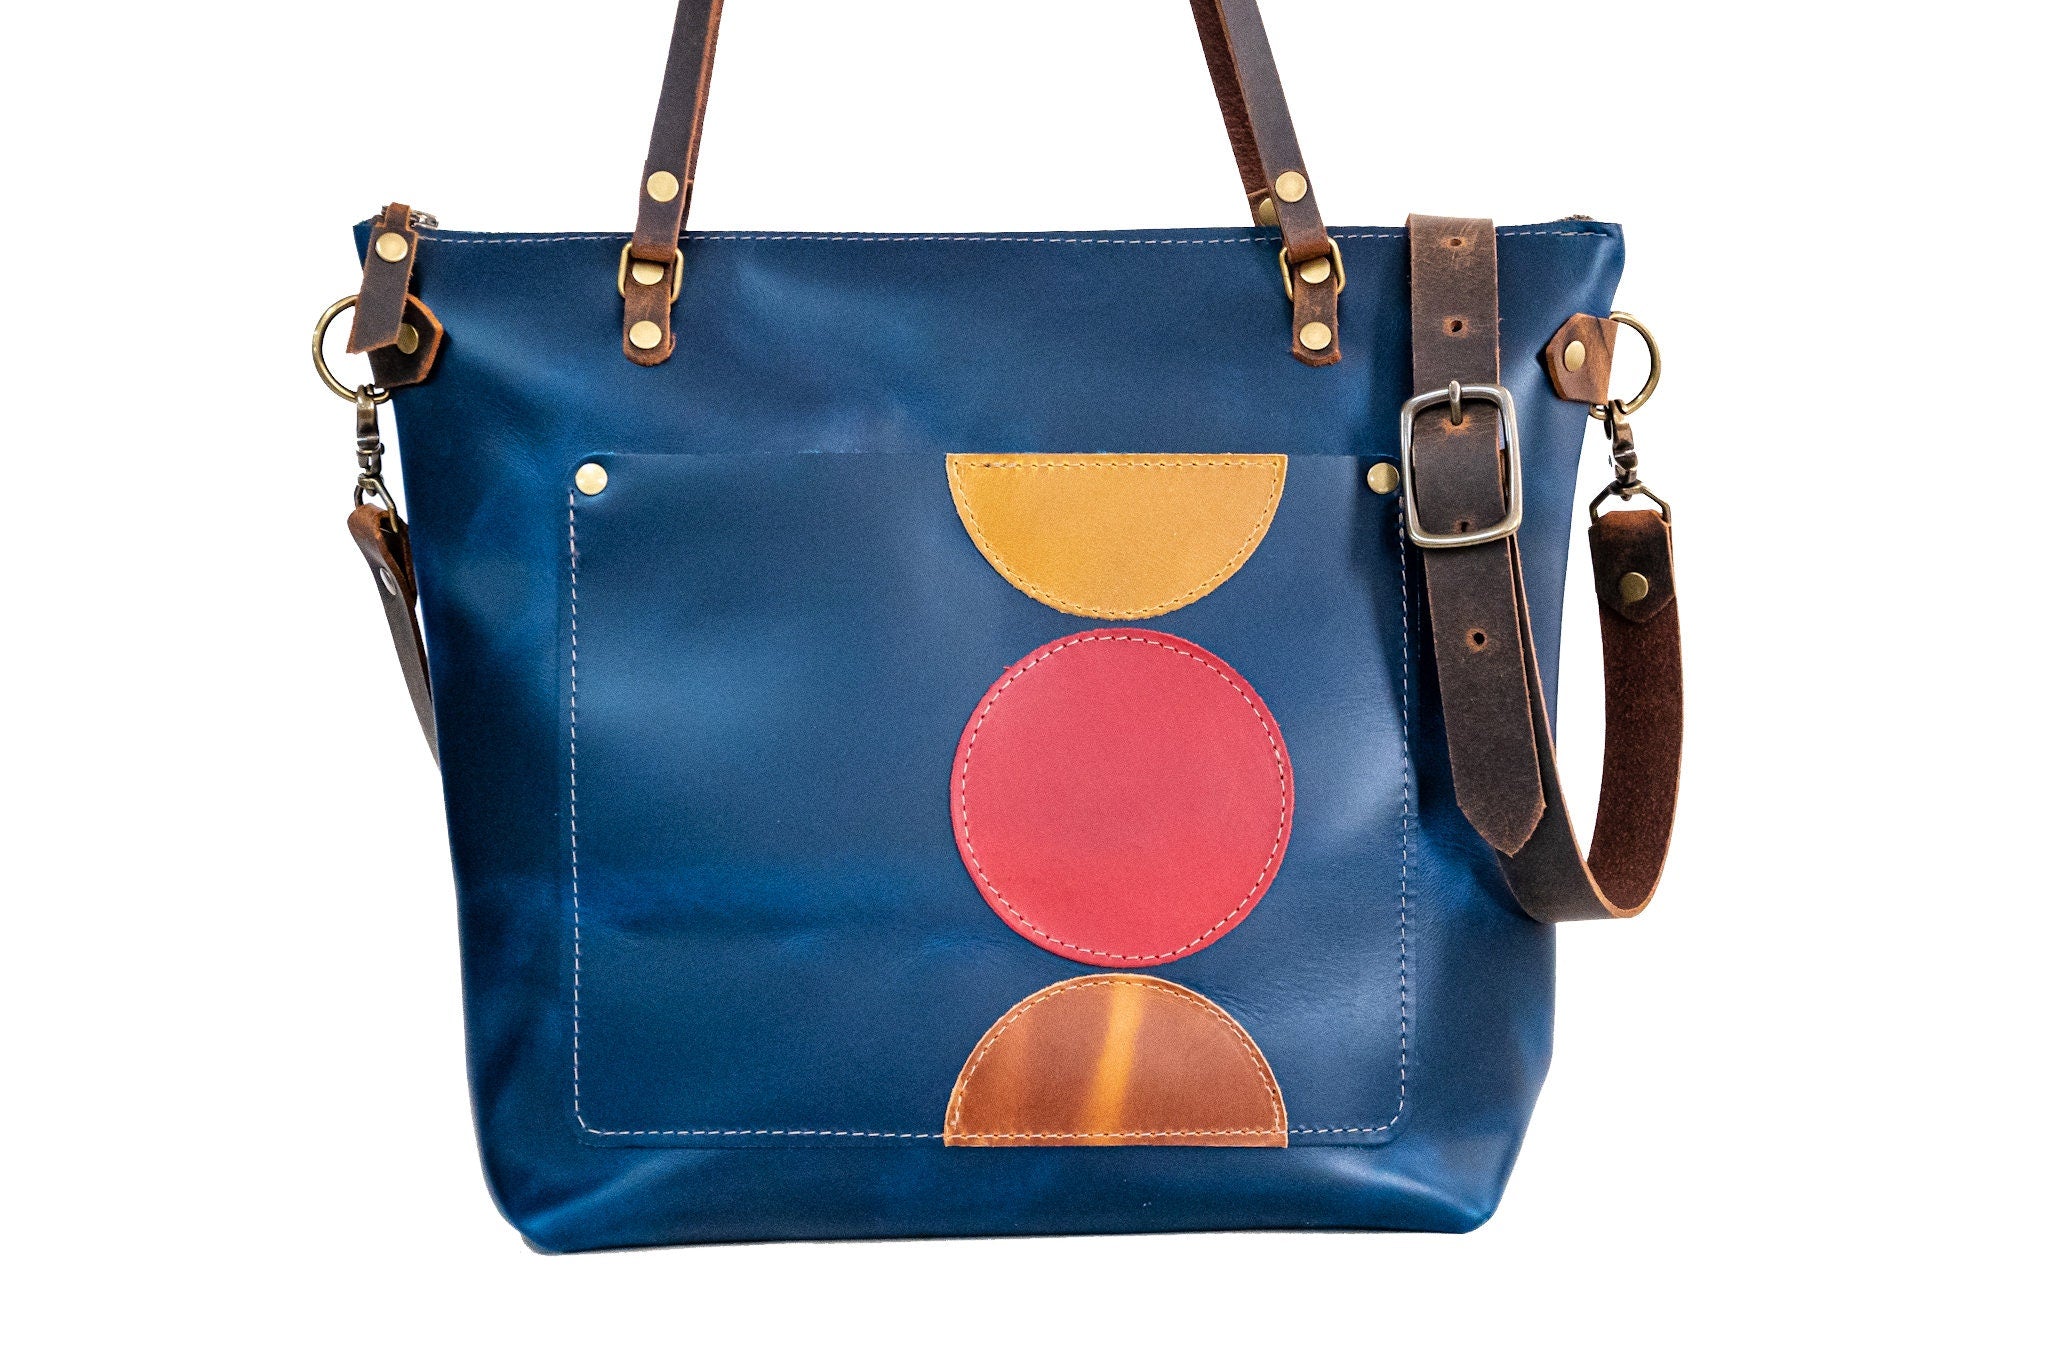 The Abstract Leather Tote Bag | LIMITED RUN | Handmade Purse | Made in the USA | Leather Handbag